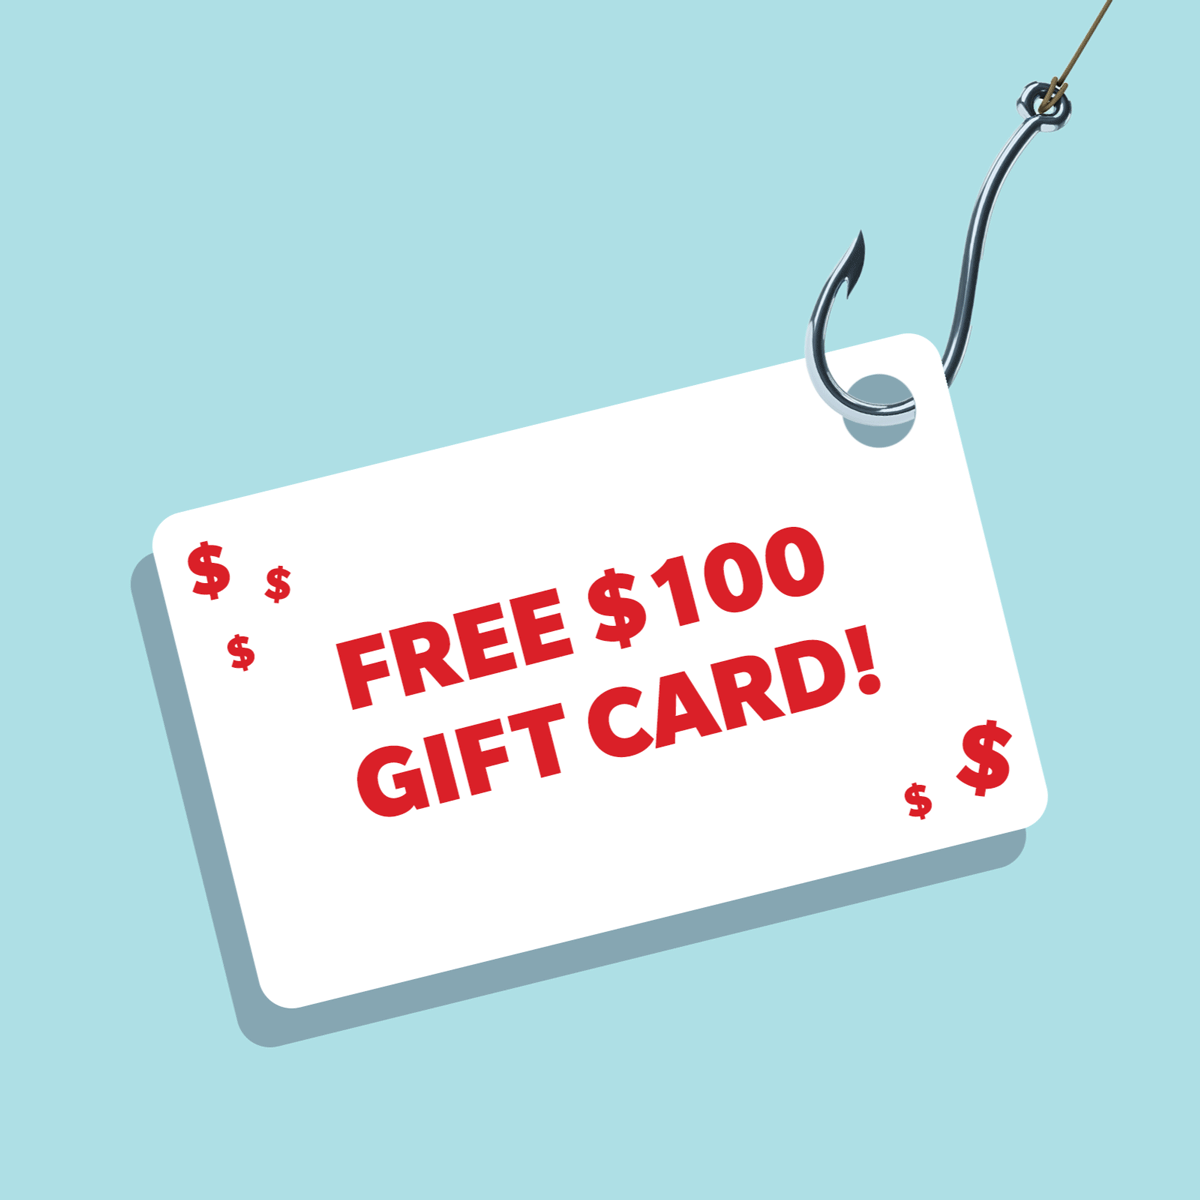 Gift Card Scams: What They Are and How to Avoid Them